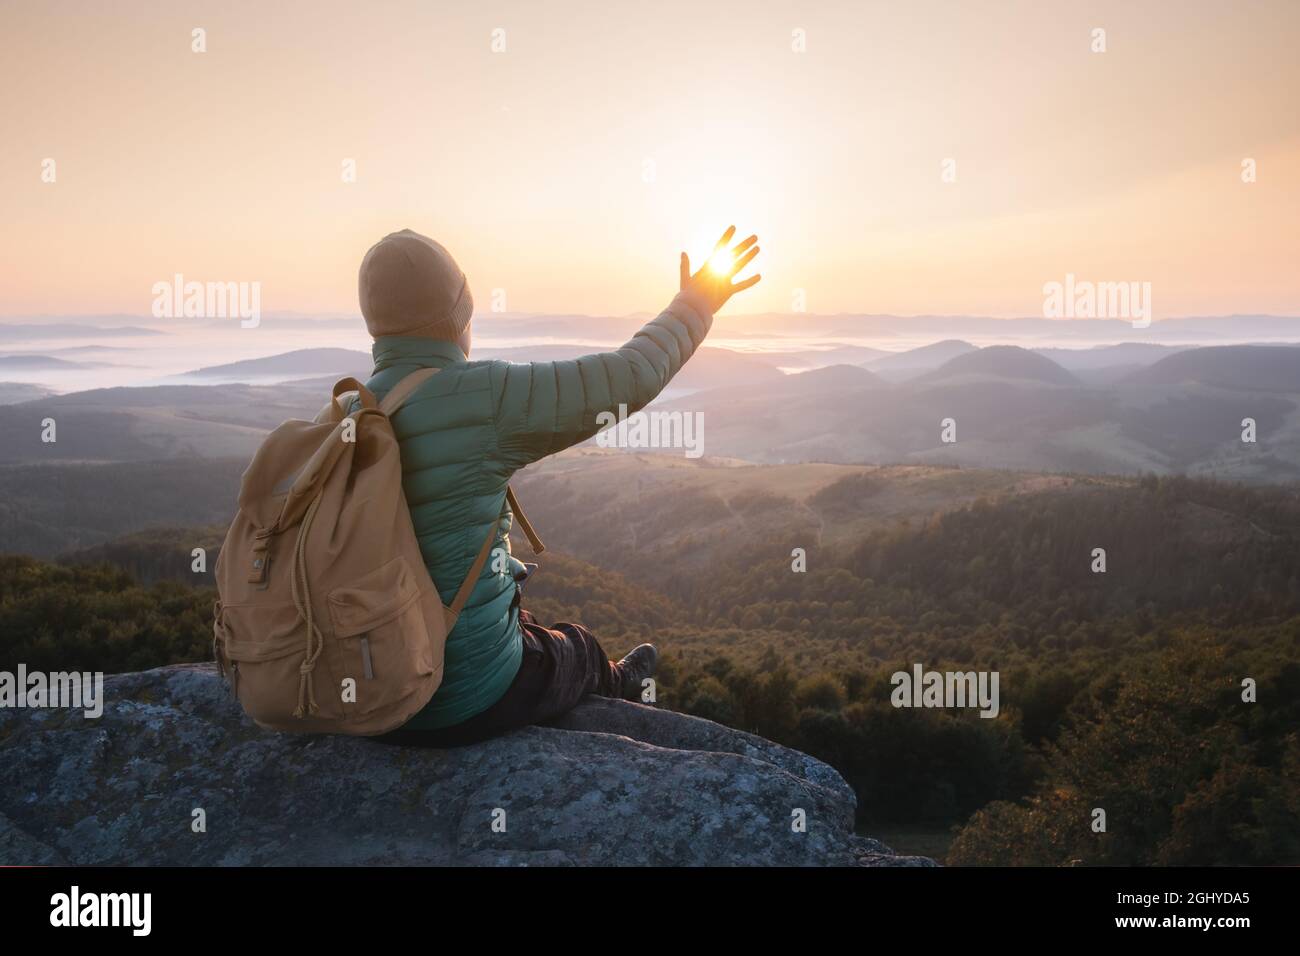 Alone tourist on the edge of the cliff against the backdrop of an incredible mountain landscape catch the sun. Landscape photography Stock Photo